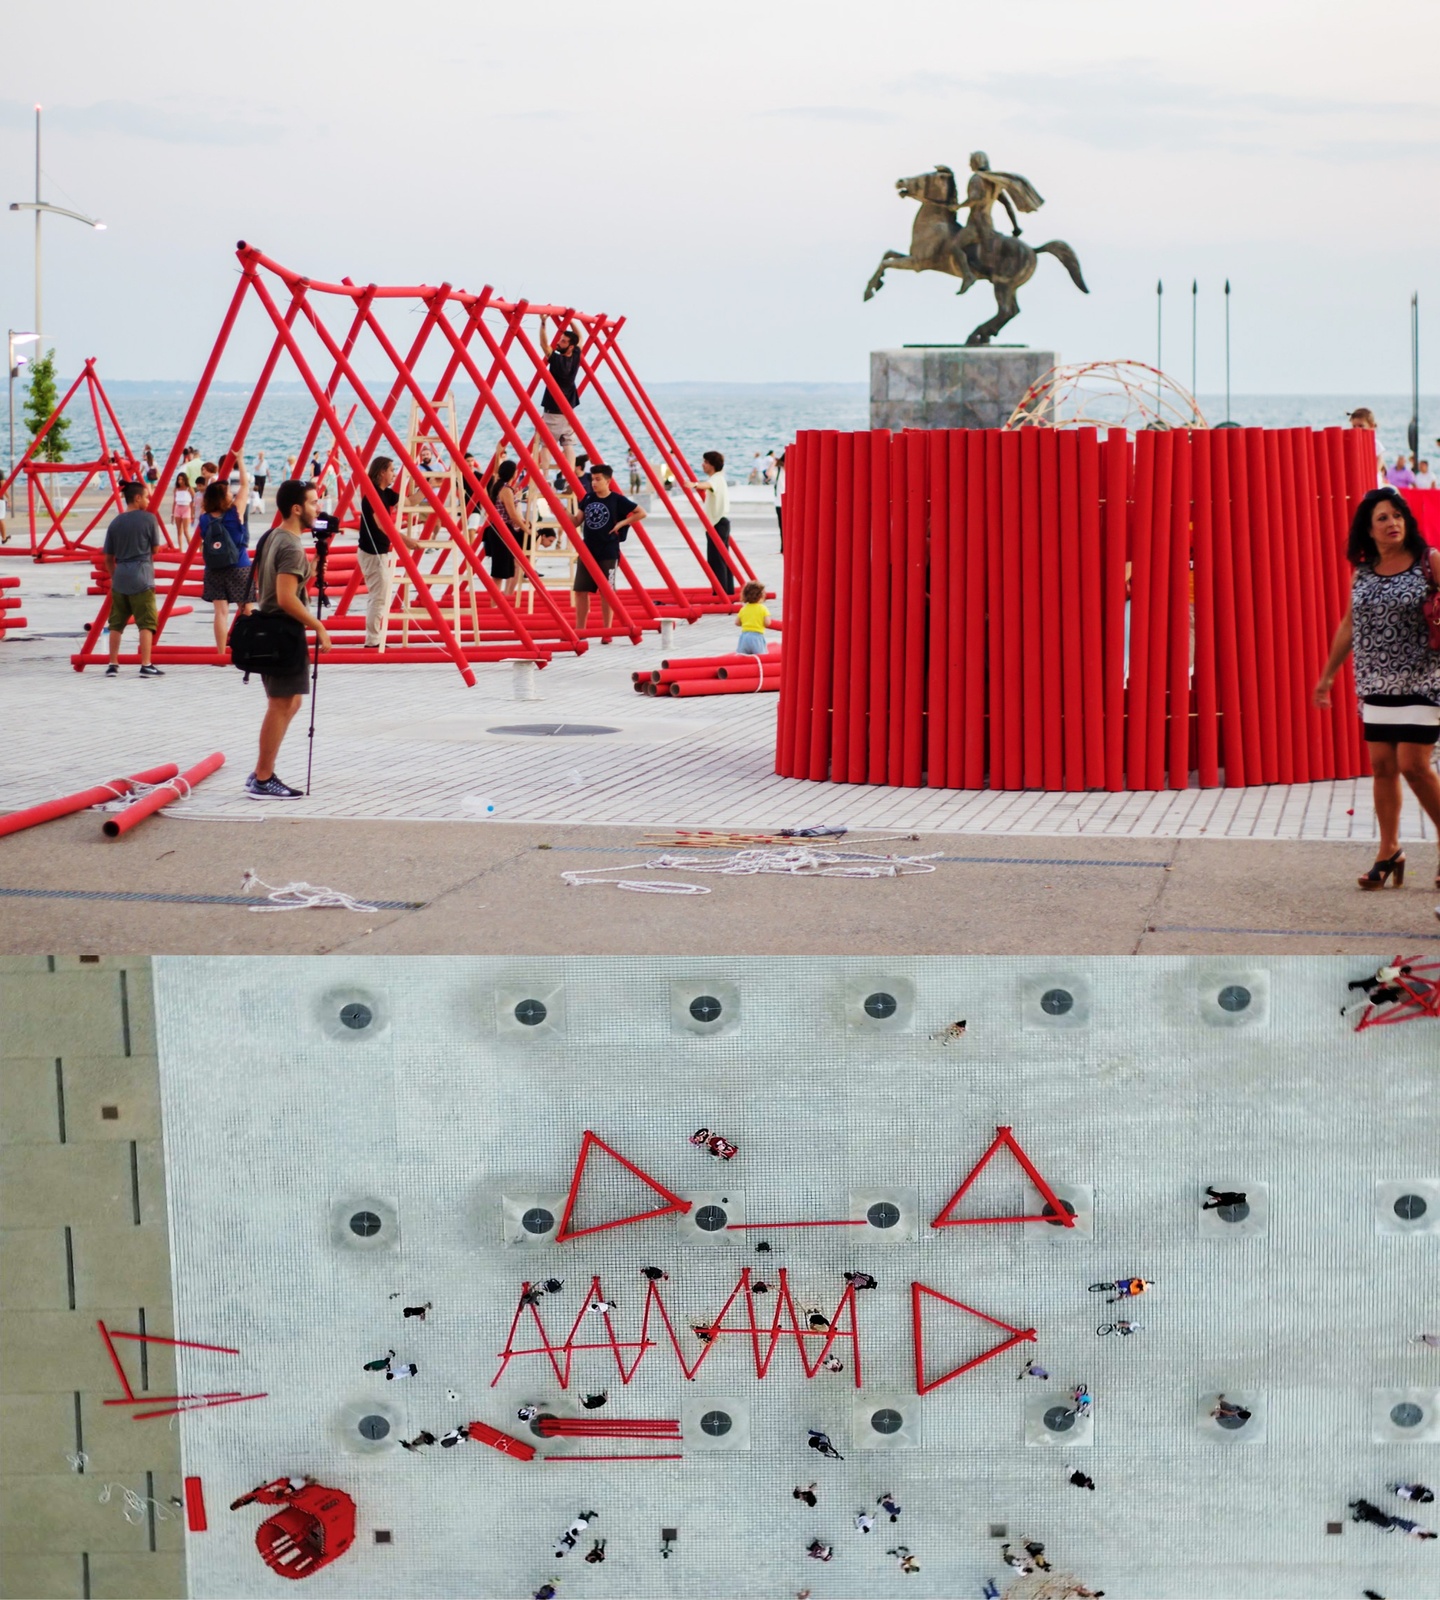 Public art piece making constructions with red tubes on a public plaza.